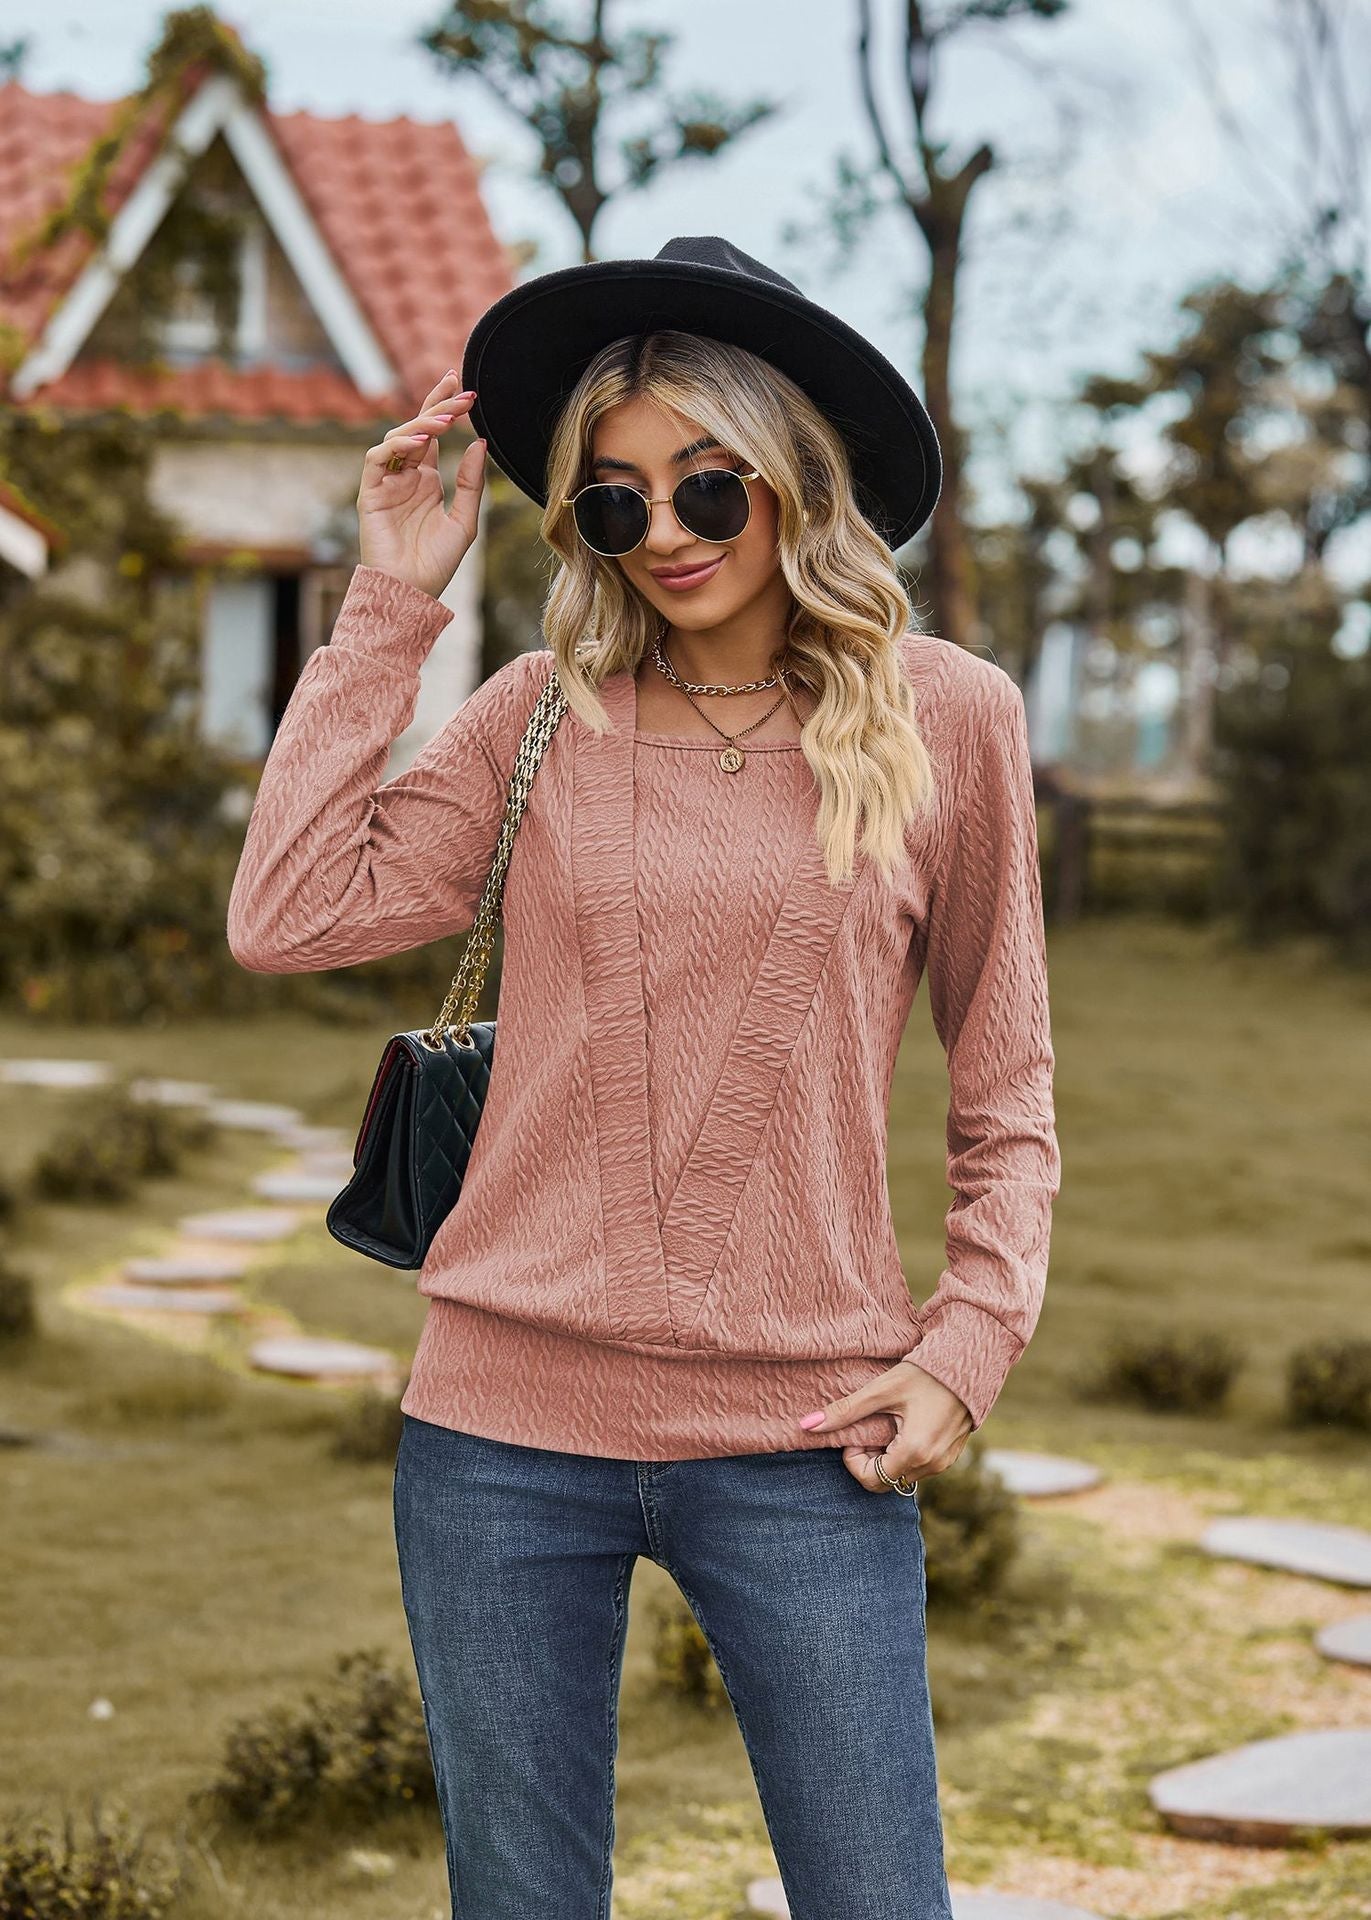 Autumn Winter Solid Color Square Collar Cross Loose Long Sleeved T shirt Top Women